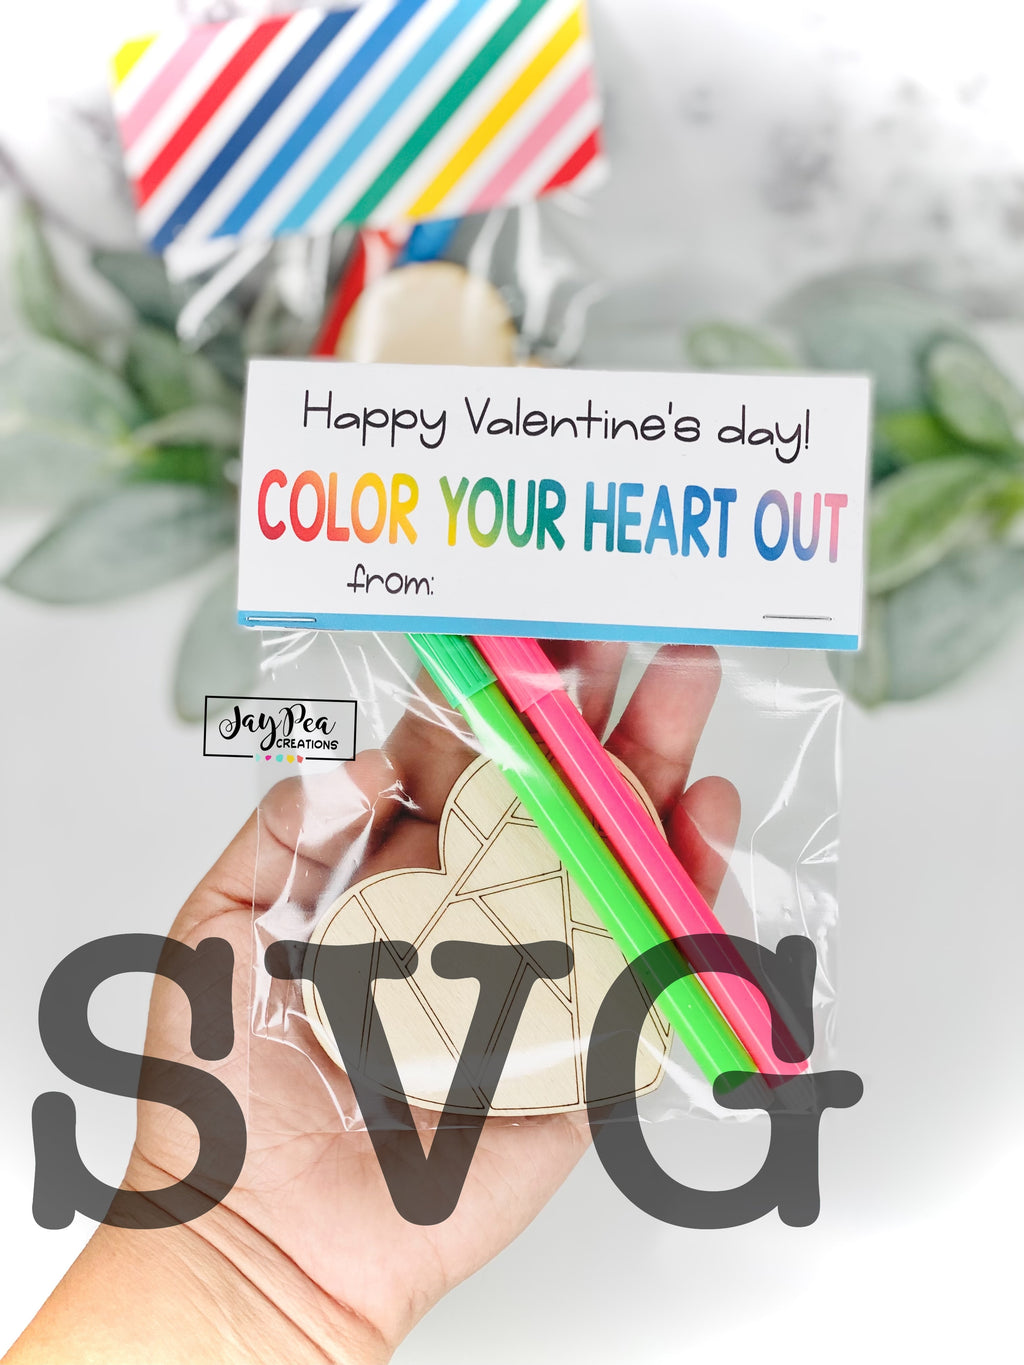 SVG color your heart out Valentines day cards